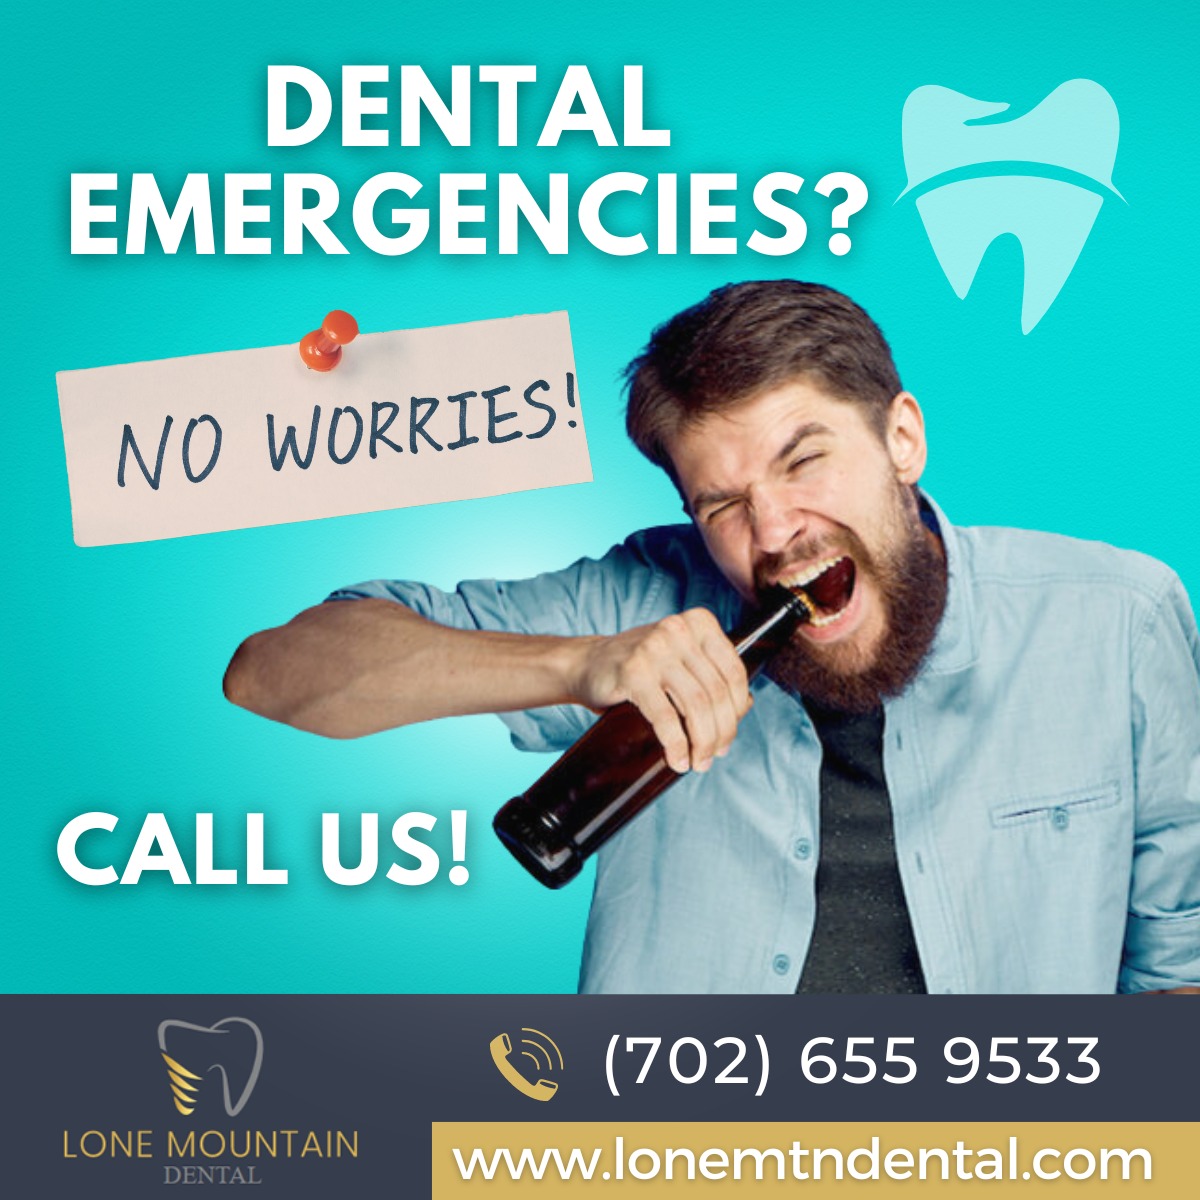 What to do with a Dental Emergency